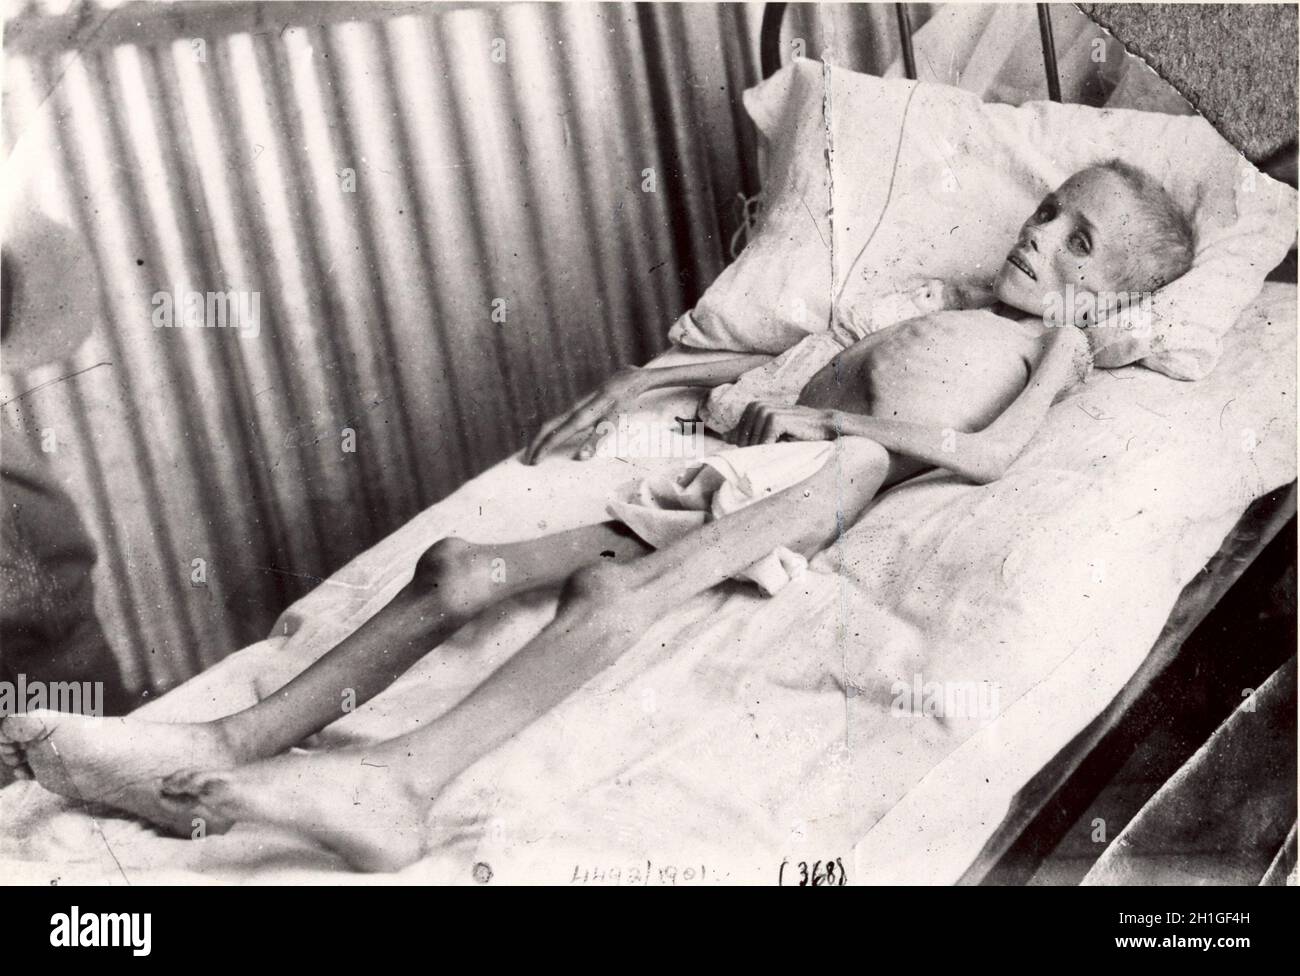 Elizabeth Cecilia van Zyl  (22 April 1894 – 9 May 1901) South African child inmate of the Bloemfontein concentration camp who died from typhoid fever during the Second Anglo-Boer War. Stock Photo